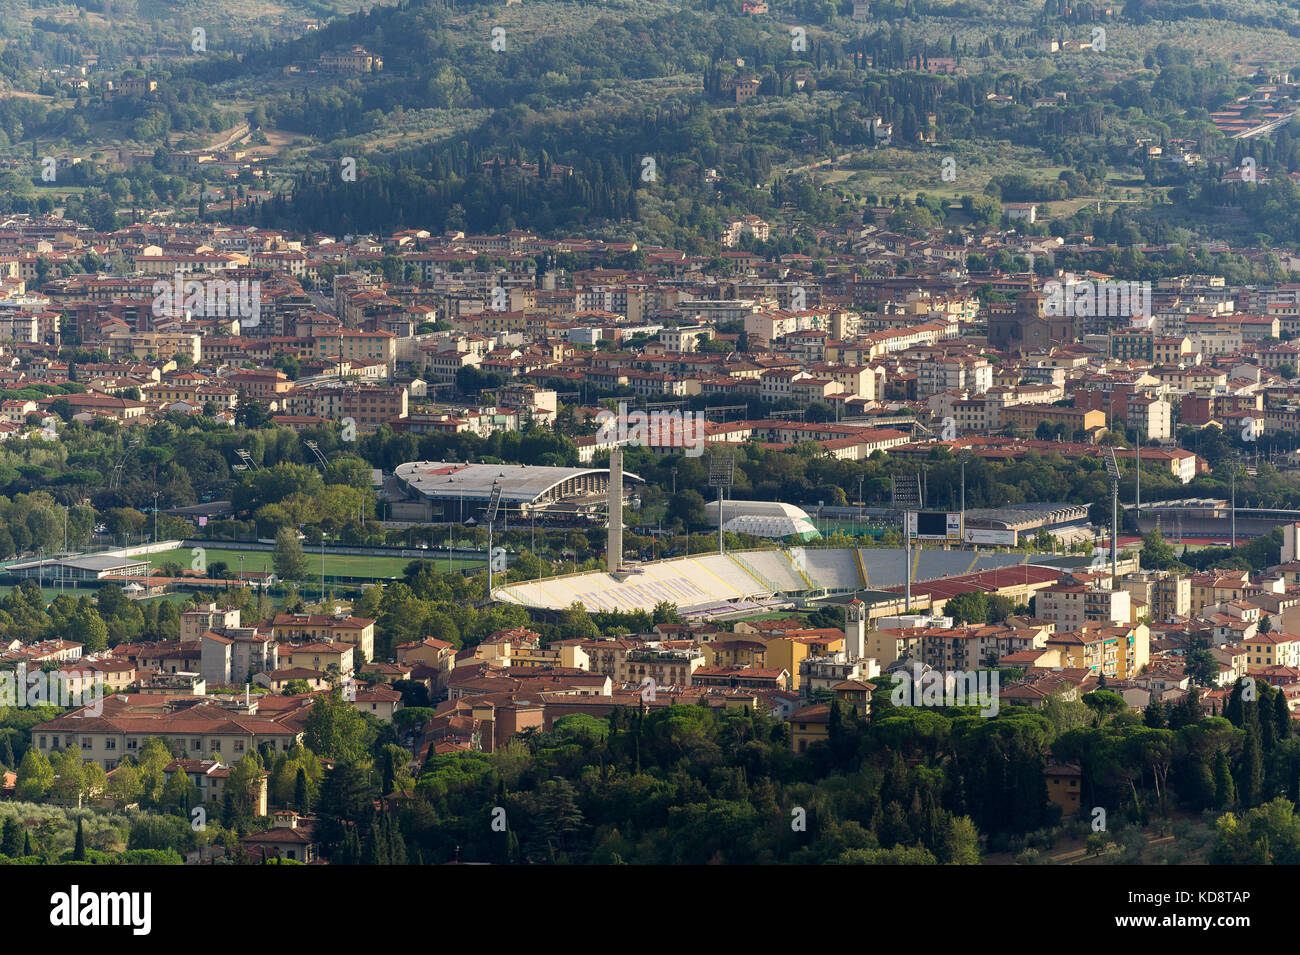 Stadio Comunale Artemio Franchi home of ACF Fiorentina and City of Firenze (Florence) seen from above, Fiesole, Tuscany, Italy. 26 August 2017 © Wojci Stock Photo